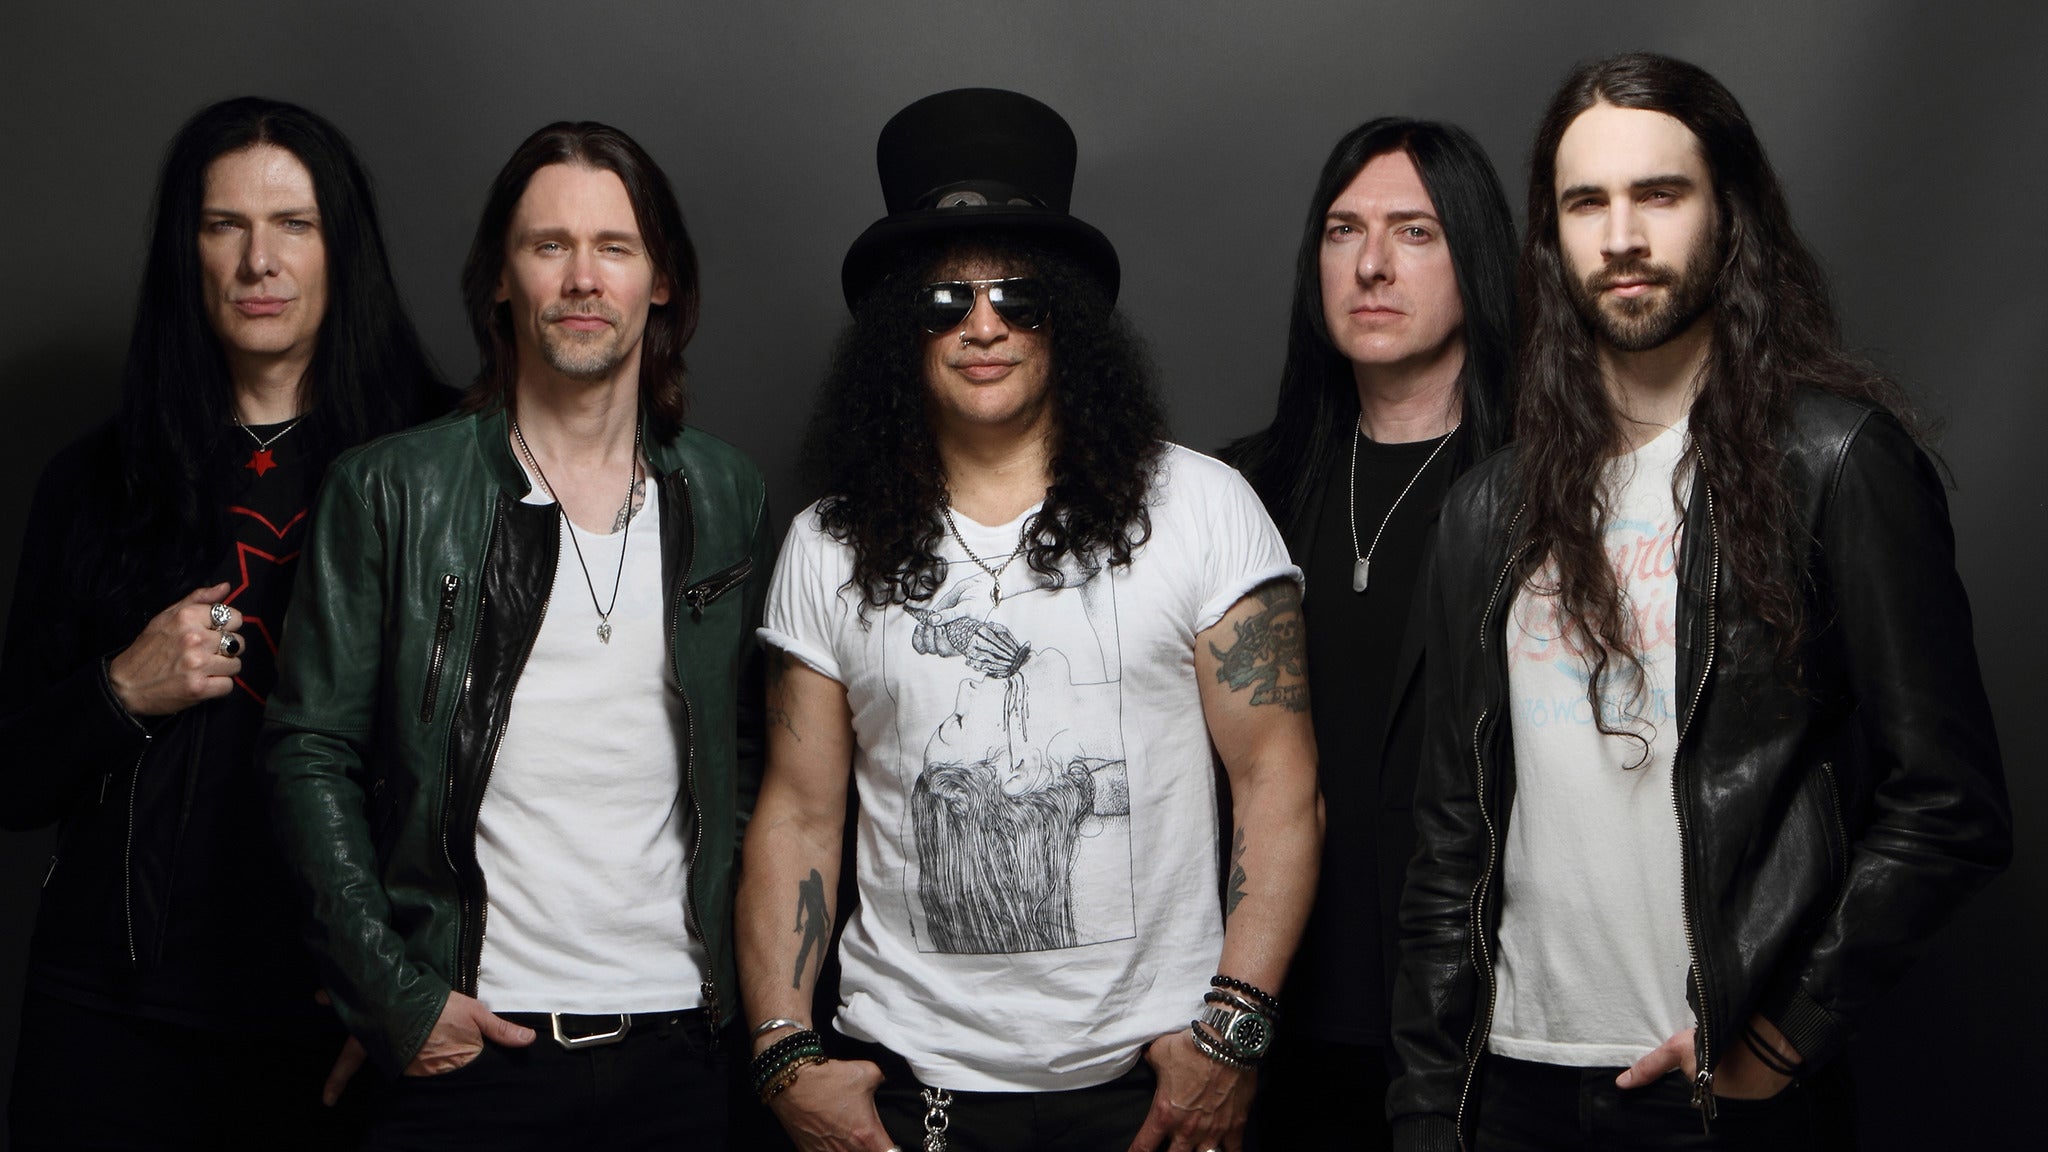 Slash Feat. Myles Kennedy And The Conspirators in Nashville promo photo for Live Nation Mobile App presale offer code